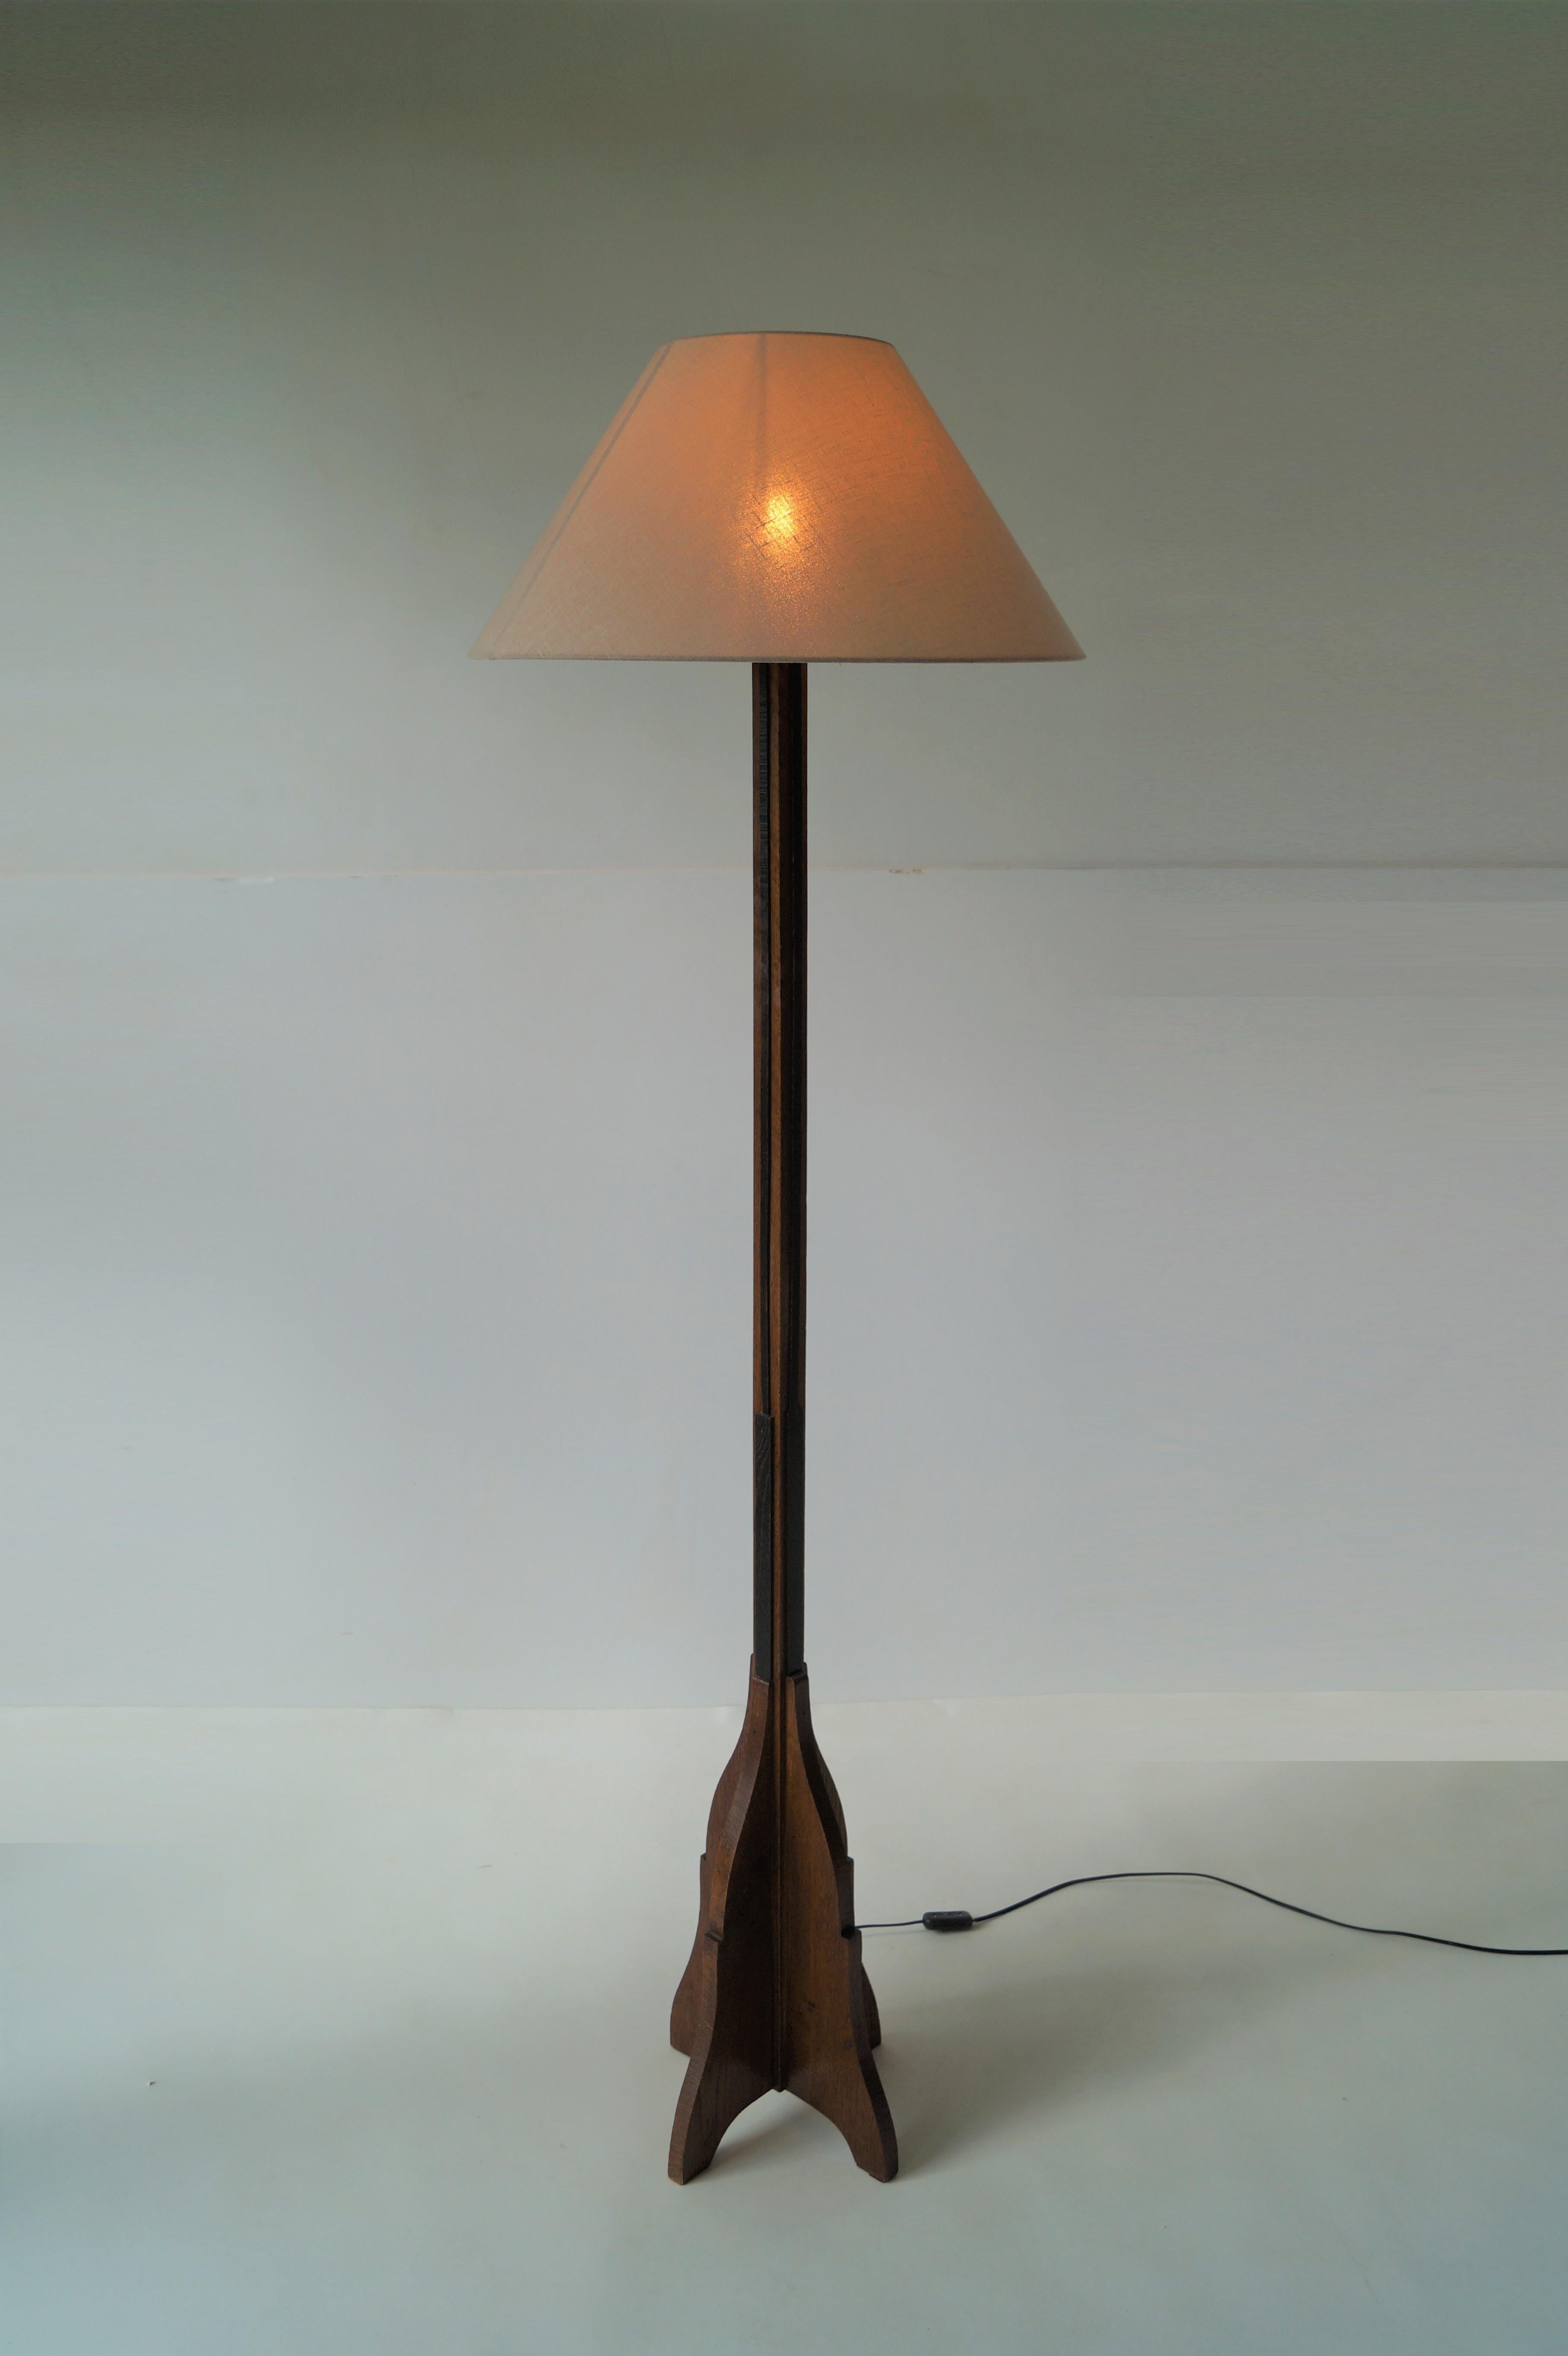 An elegant Dutch Art Deco 1920s floorlamp, Amsterdamse School (Amsterdam School). Made from solid woodcarved oak, decorated with slats of black stained oak, this piece has an elegant appearance. 
The lamp combines very well with other Amsterdam